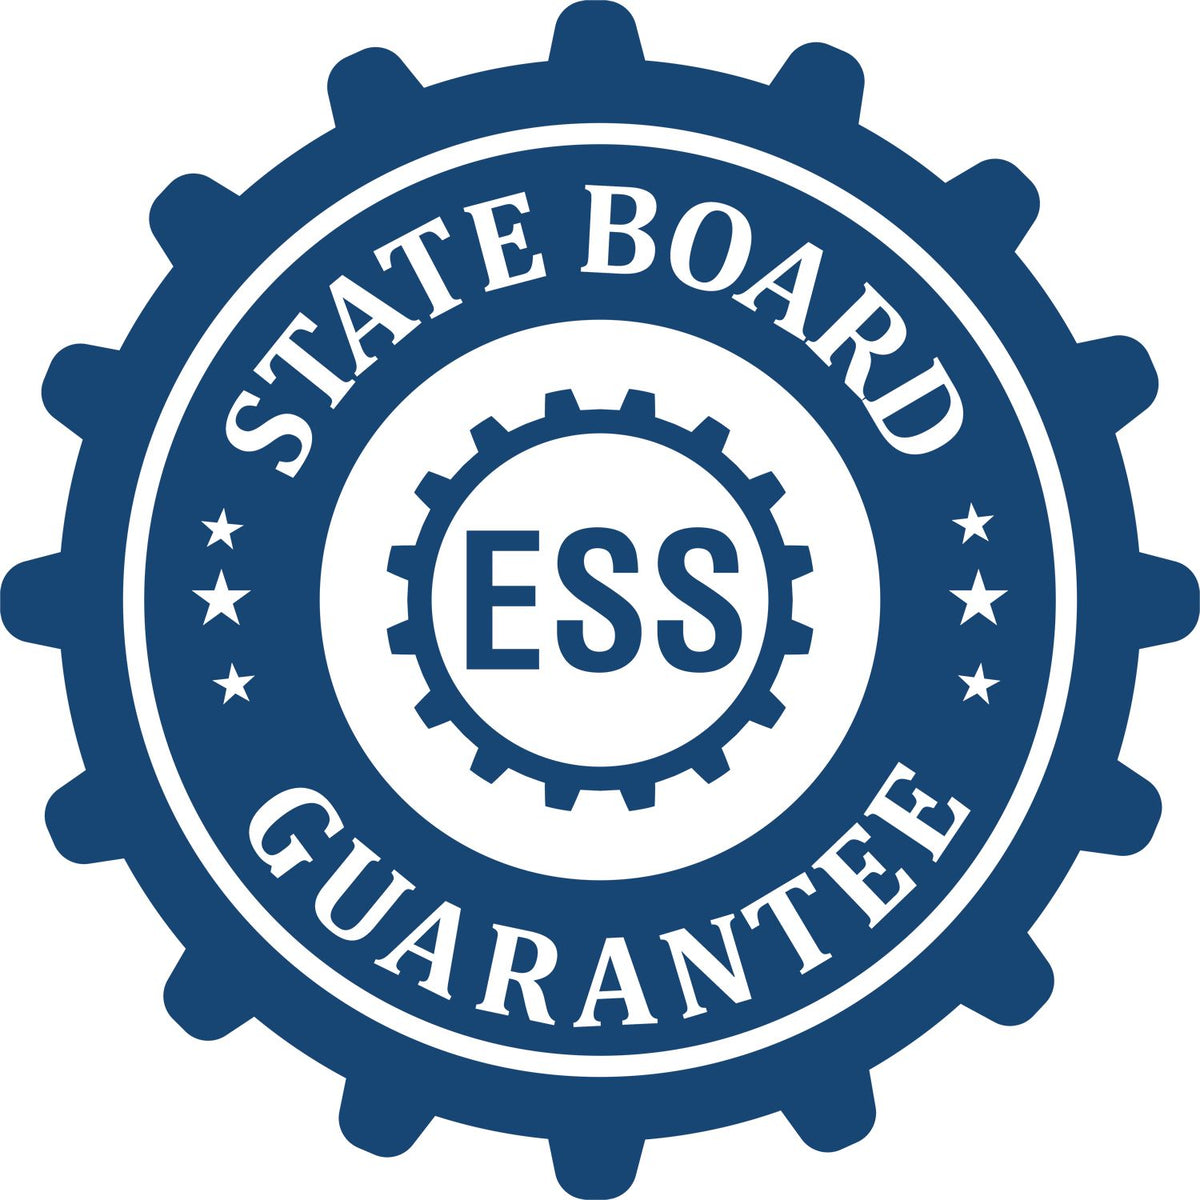 An emblem in a gear shape illustrating a state board guarantee for the State of Illinois Long Reach Architectural Embossing Seal product.